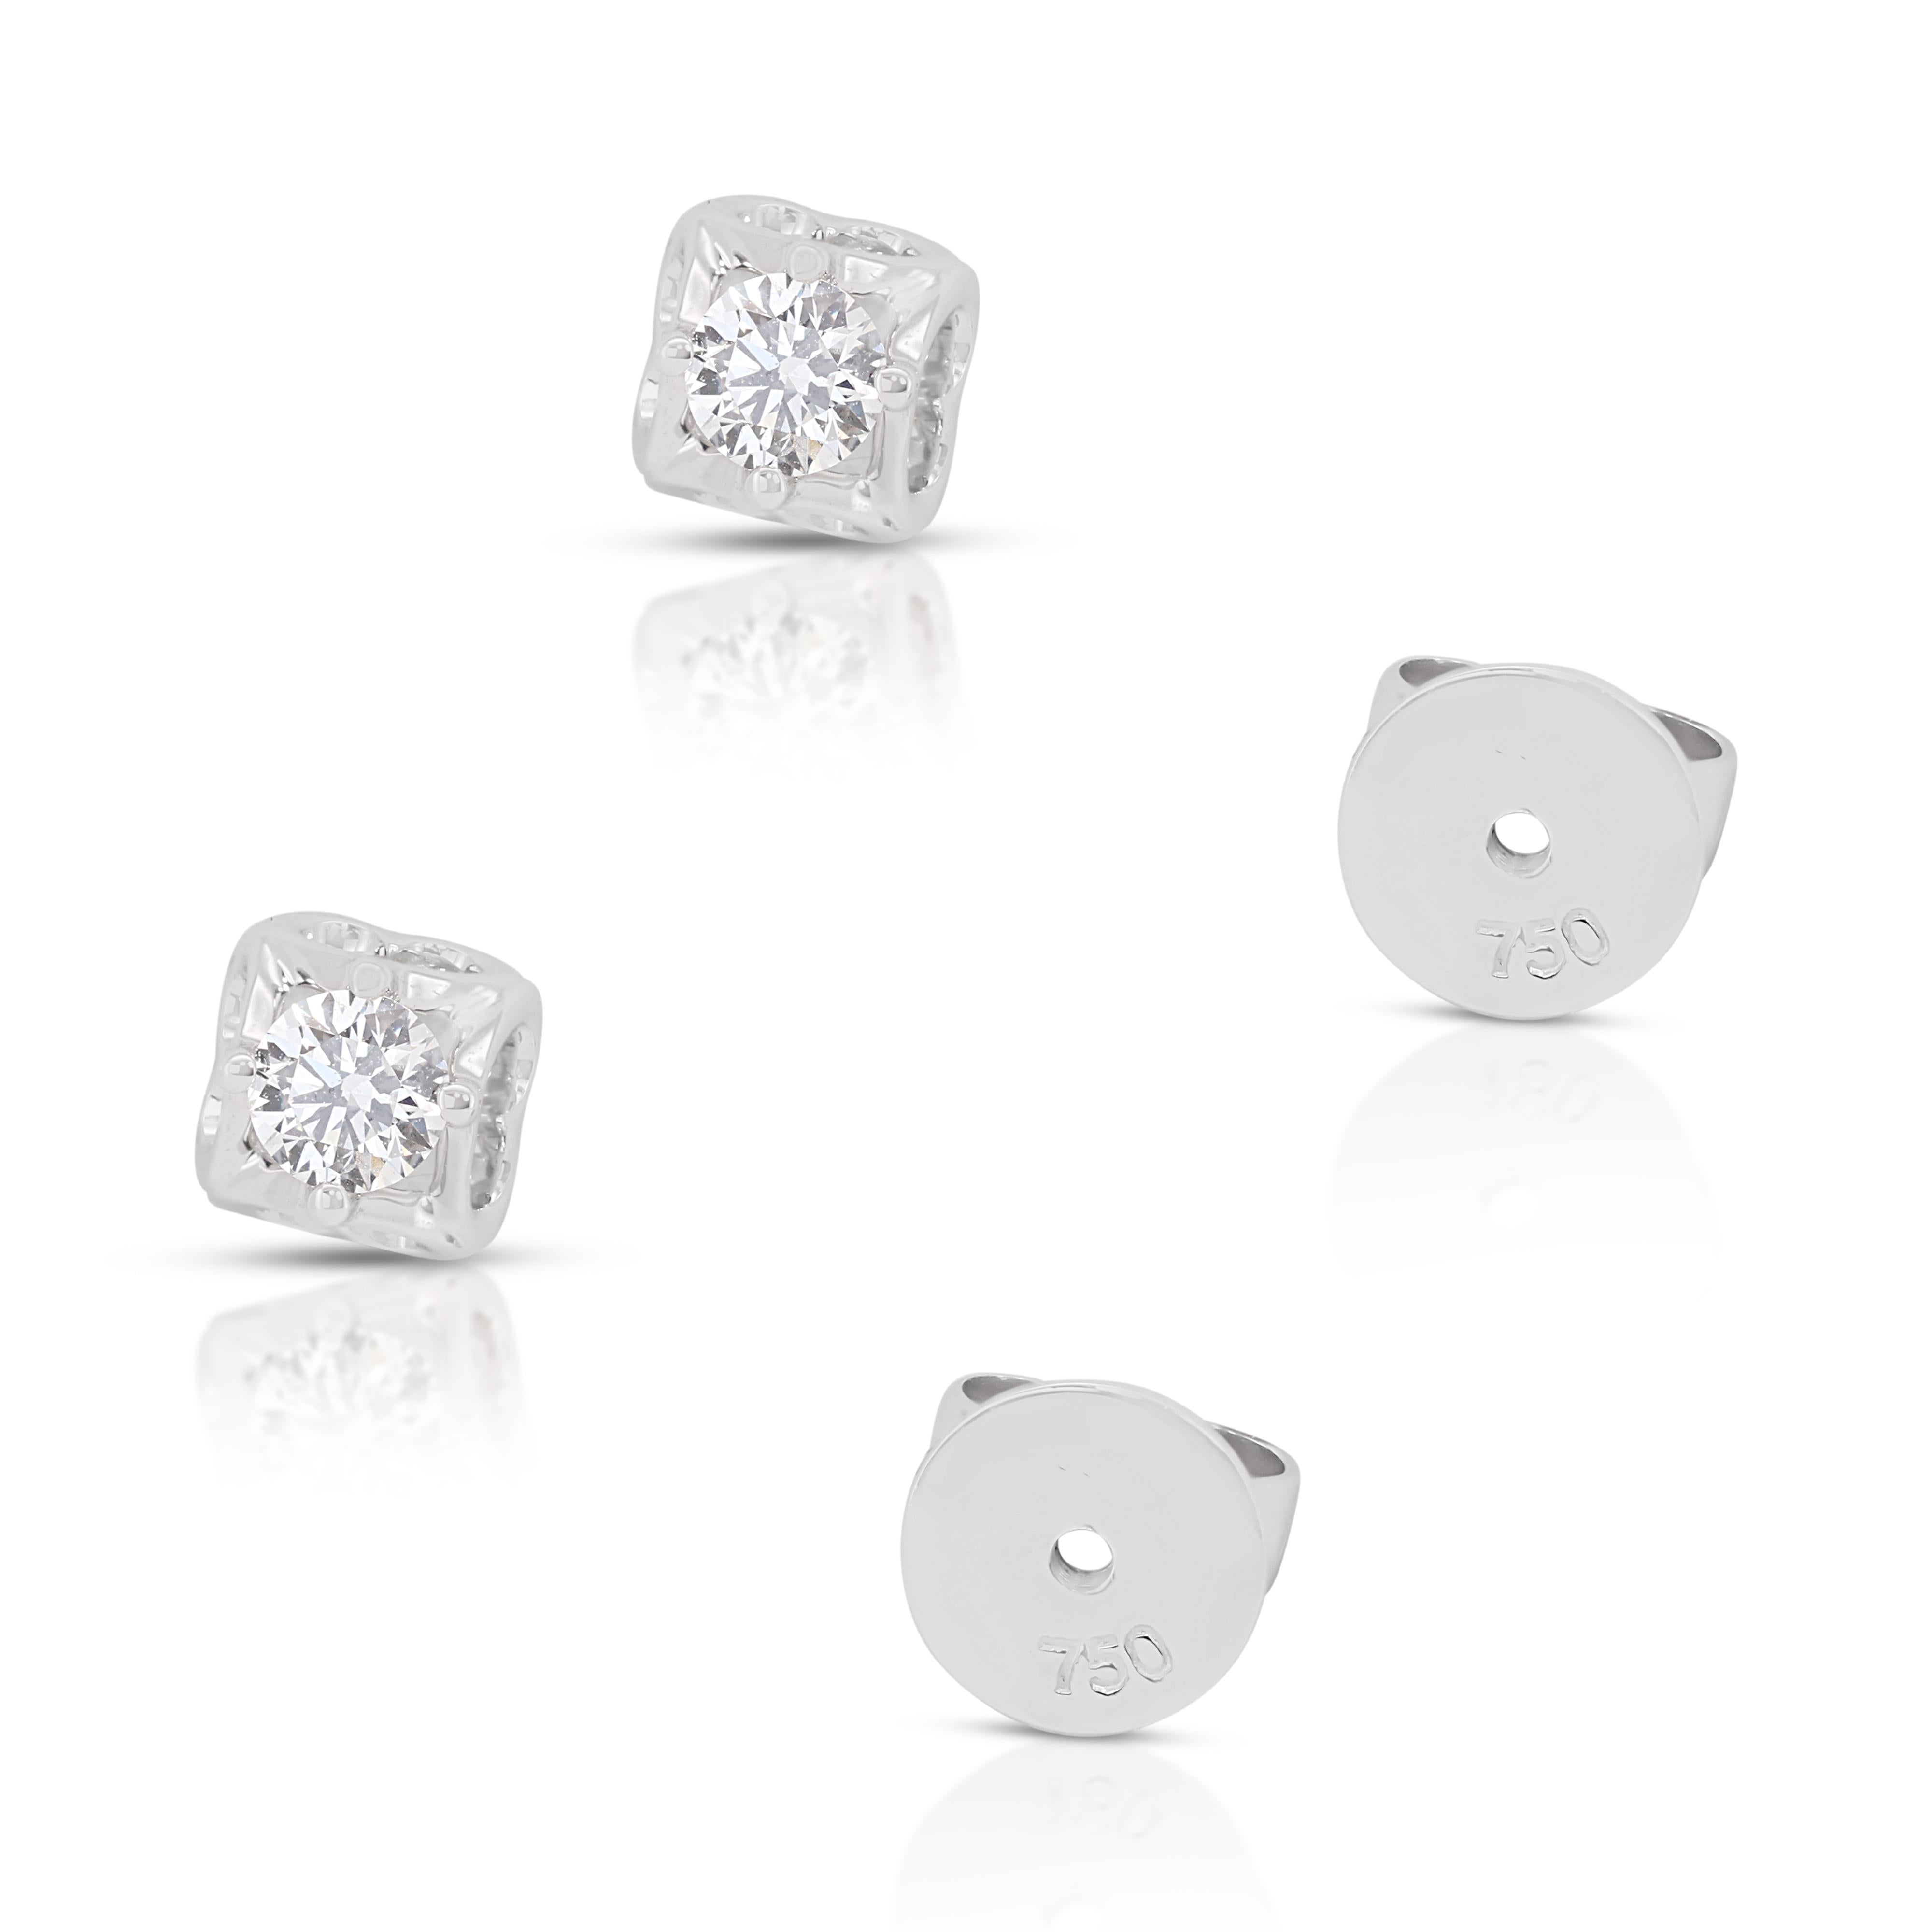 Luxurious 0.20ct Diamond Stud Earrings in 18k White Gold For Sale 2